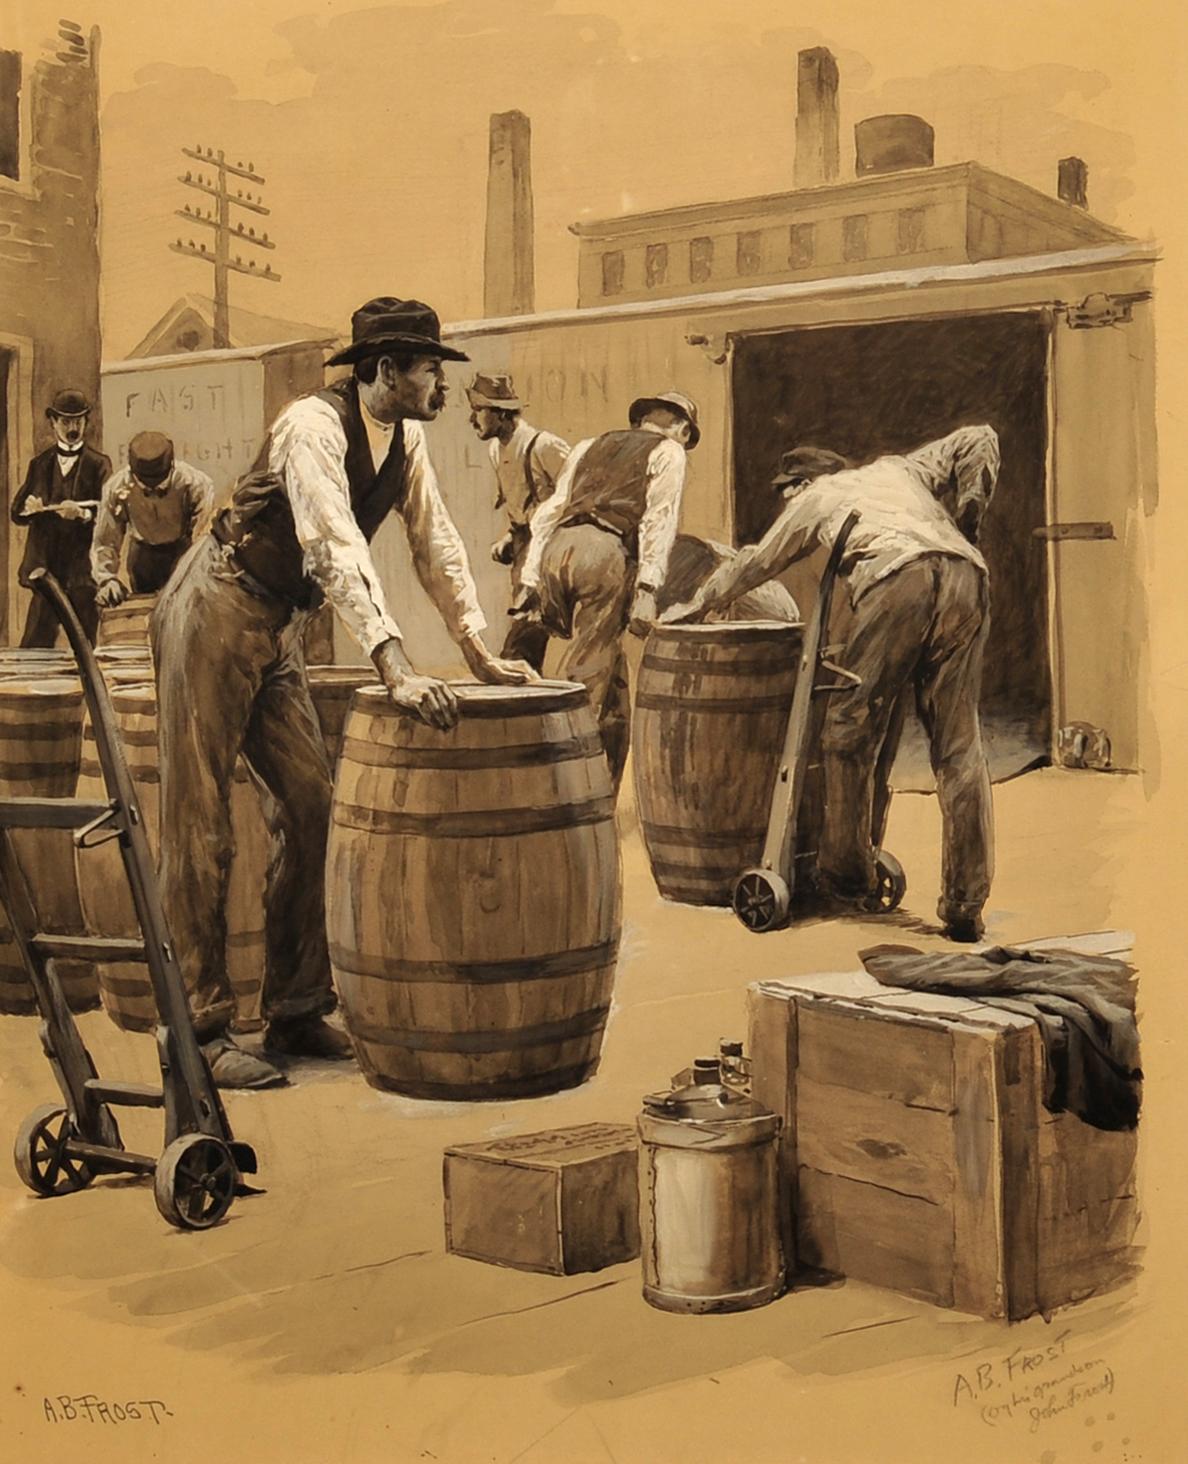 Workers Loading Freight Train - Painting by Arthur Burdett Frost